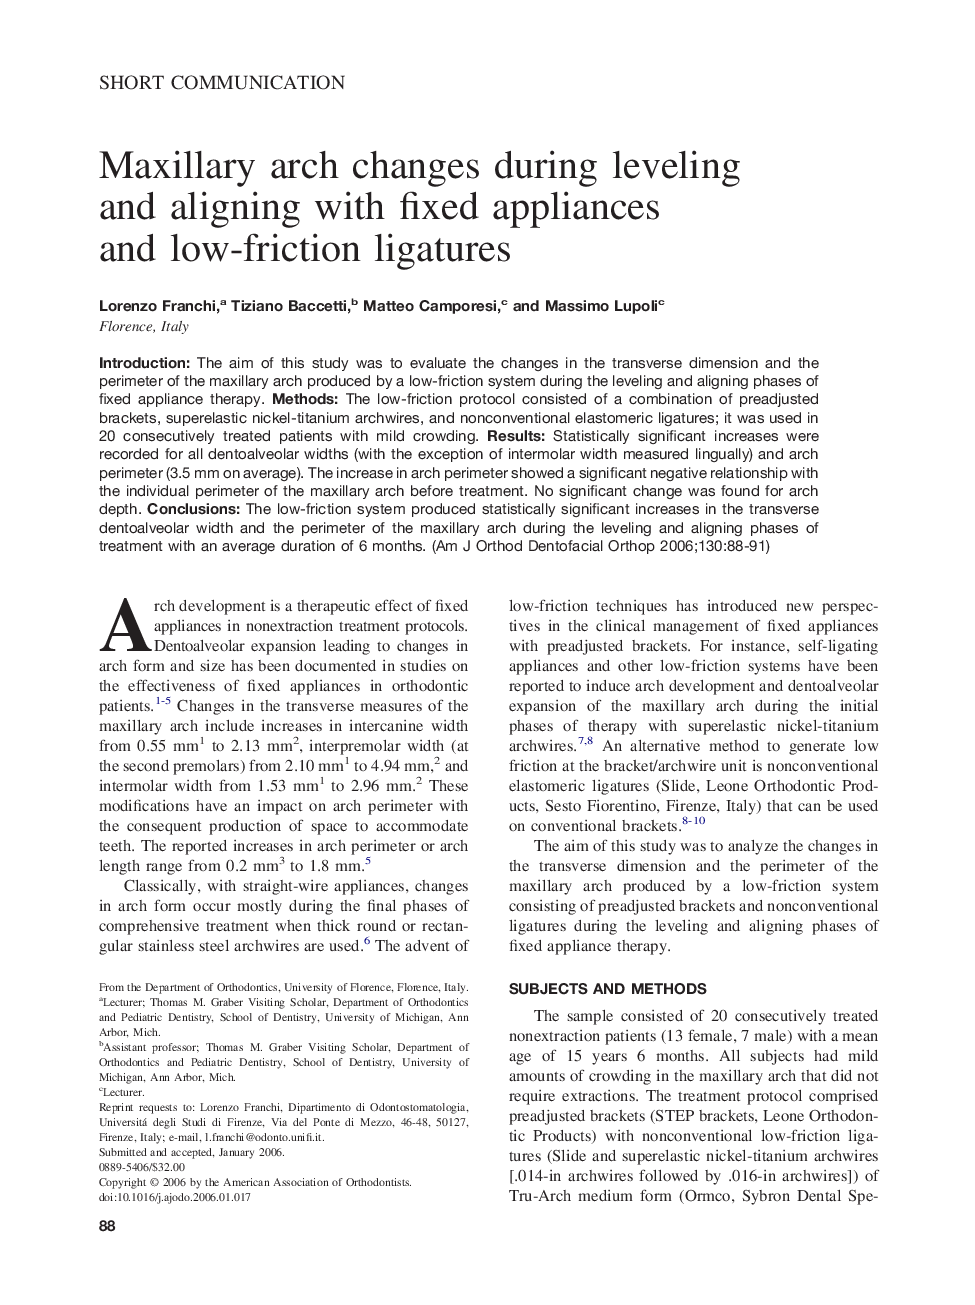 Maxillary arch changes during leveling and aligning with fixed appliances and low-friction ligatures